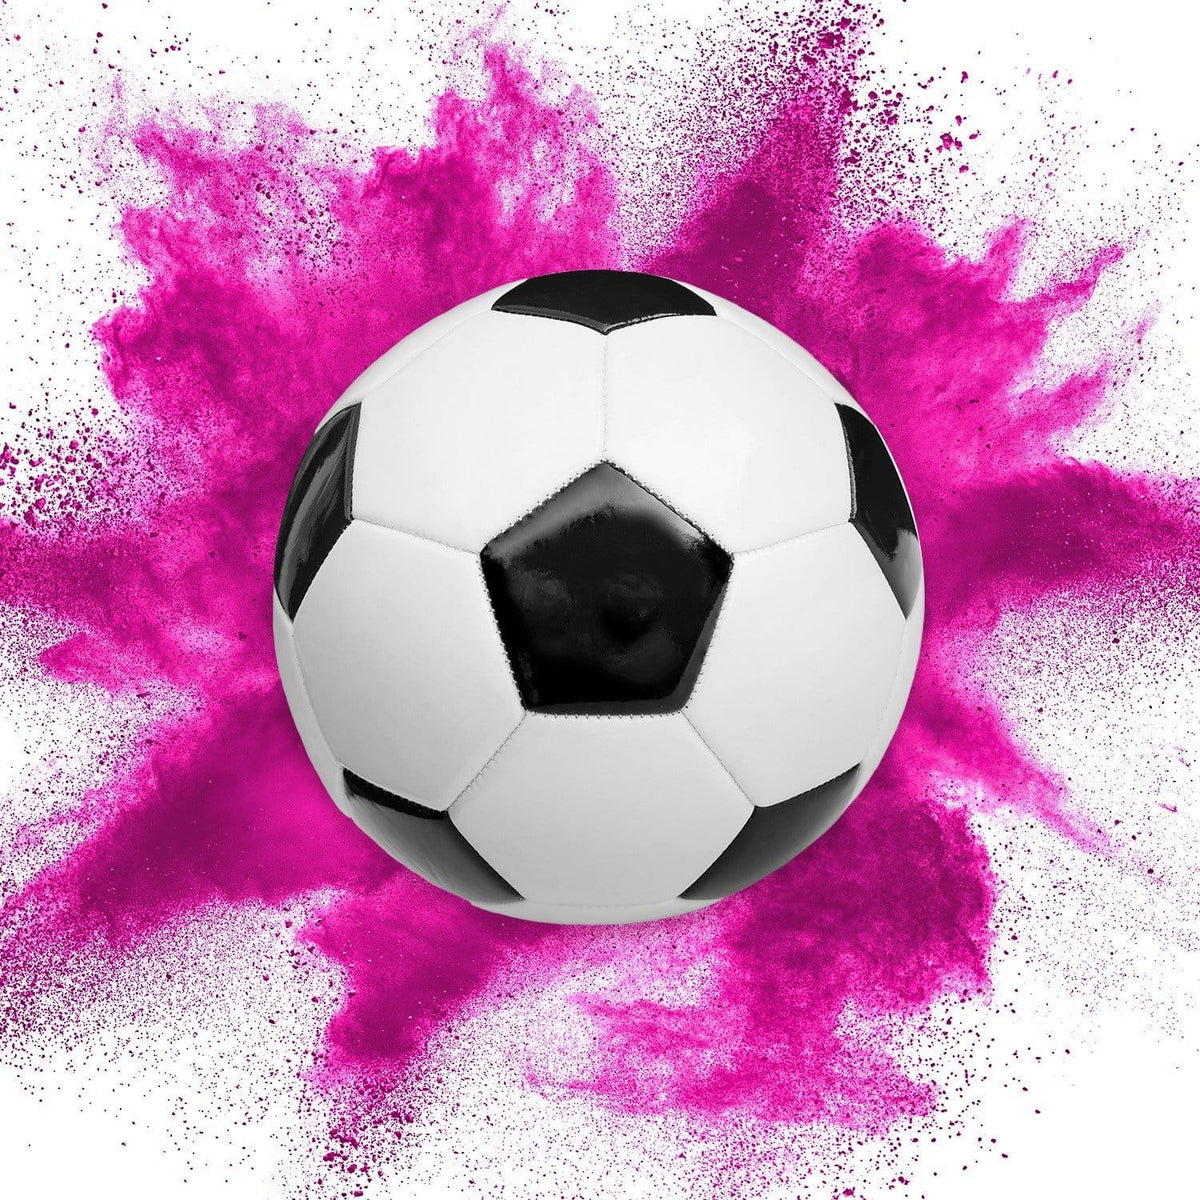 Buy Baby Shower Gender Reveal Soccer Ball - Pink sold at Party Expert